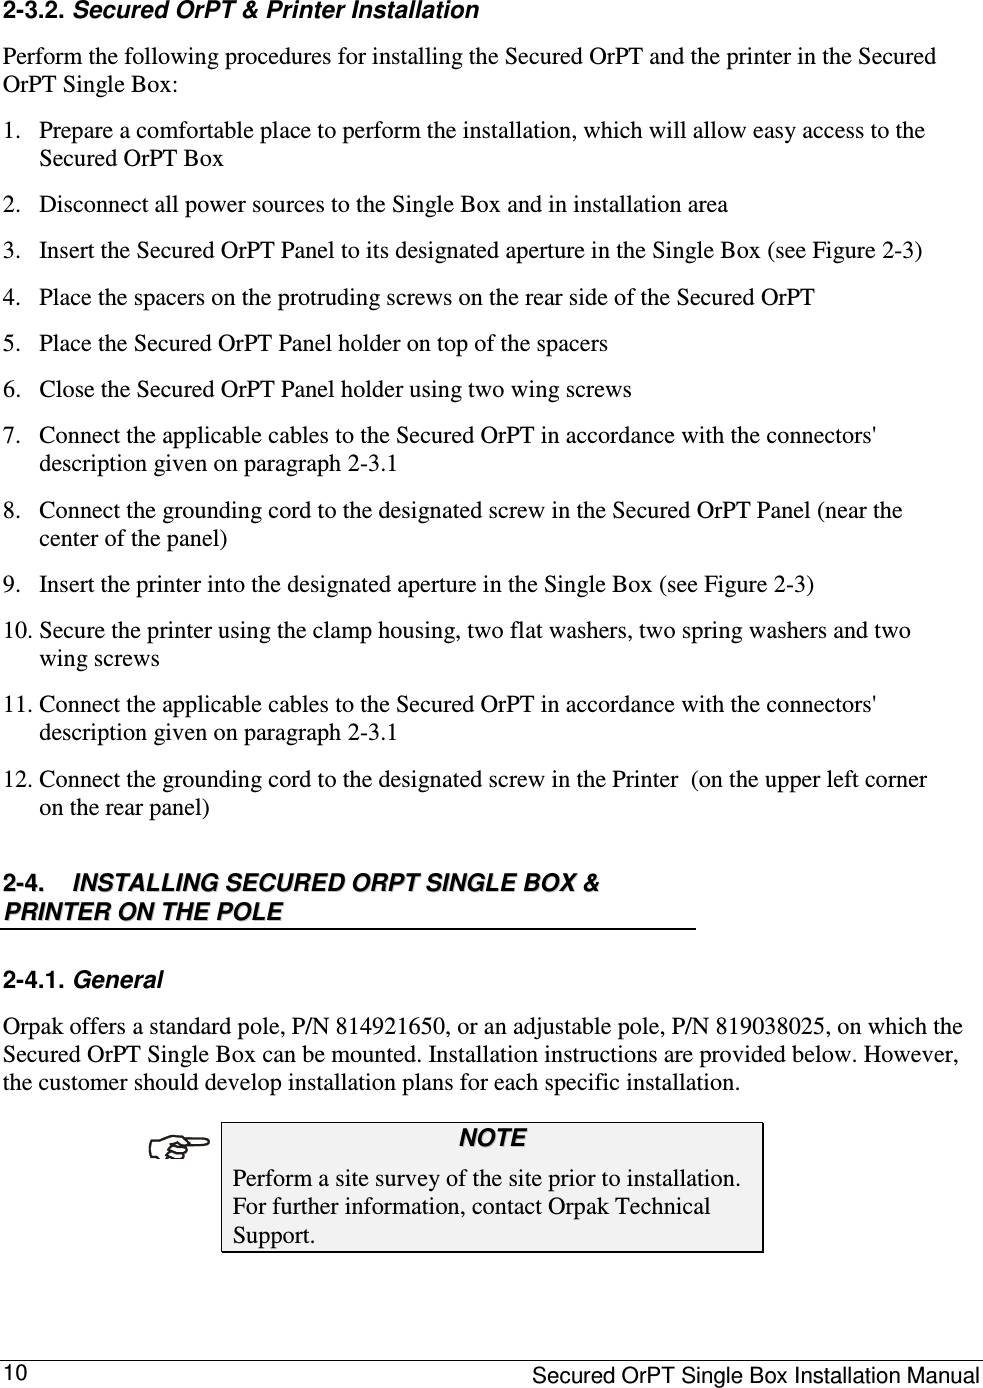     Secured OrPT Single Box Installation Manual 10 2-3.2. Secured OrPT &amp; Printer Installation Perform the following procedures for installing the Secured OrPT and the printer in the Secured OrPT Single Box:  1. Prepare a comfortable place to perform the installation, which will allow easy access to the Secured OrPT Box 2. Disconnect all power sources to the Single Box and in installation area 3. Insert the Secured OrPT Panel to its designated aperture in the Single Box (see Figure  2-3) 4. Place the spacers on the protruding screws on the rear side of the Secured OrPT 5. Place the Secured OrPT Panel holder on top of the spacers 6. Close the Secured OrPT Panel holder using two wing screws 7. Connect the applicable cables to the Secured OrPT in accordance with the connectors&apos; description given on paragraph  2-3.1 8. Connect the grounding cord to the designated screw in the Secured OrPT Panel (near the center of the panel) 9. Insert the printer into the designated aperture in the Single Box (see Figure  2-3) 10. Secure the printer using the clamp housing, two flat washers, two spring washers and two wing screws 11. Connect the applicable cables to the Secured OrPT in accordance with the connectors&apos; description given on paragraph  2-3.1 12. Connect the grounding cord to the designated screw in the Printer  (on the upper left corner on the rear panel) 22--44..  IINNSSTTAALLLLIINNGG  SSEECCUURREEDD  OORRPPTT  SSIINNGGLLEE  BBOOXX  &amp;&amp;  PPRRIINNTTEERR  OONN  TTHHEE  PPOOLLEE  2-4.1. General  Orpak offers a standard pole, P/N 814921650, or an adjustable pole, P/N 819038025, on which the Secured OrPT Single Box can be mounted. Installation instructions are provided below. However, the customer should develop installation plans for each specific installation.   NNOOTTEE  Perform a site survey of the site prior to installation.  For further information, contact Orpak Technical Support.   